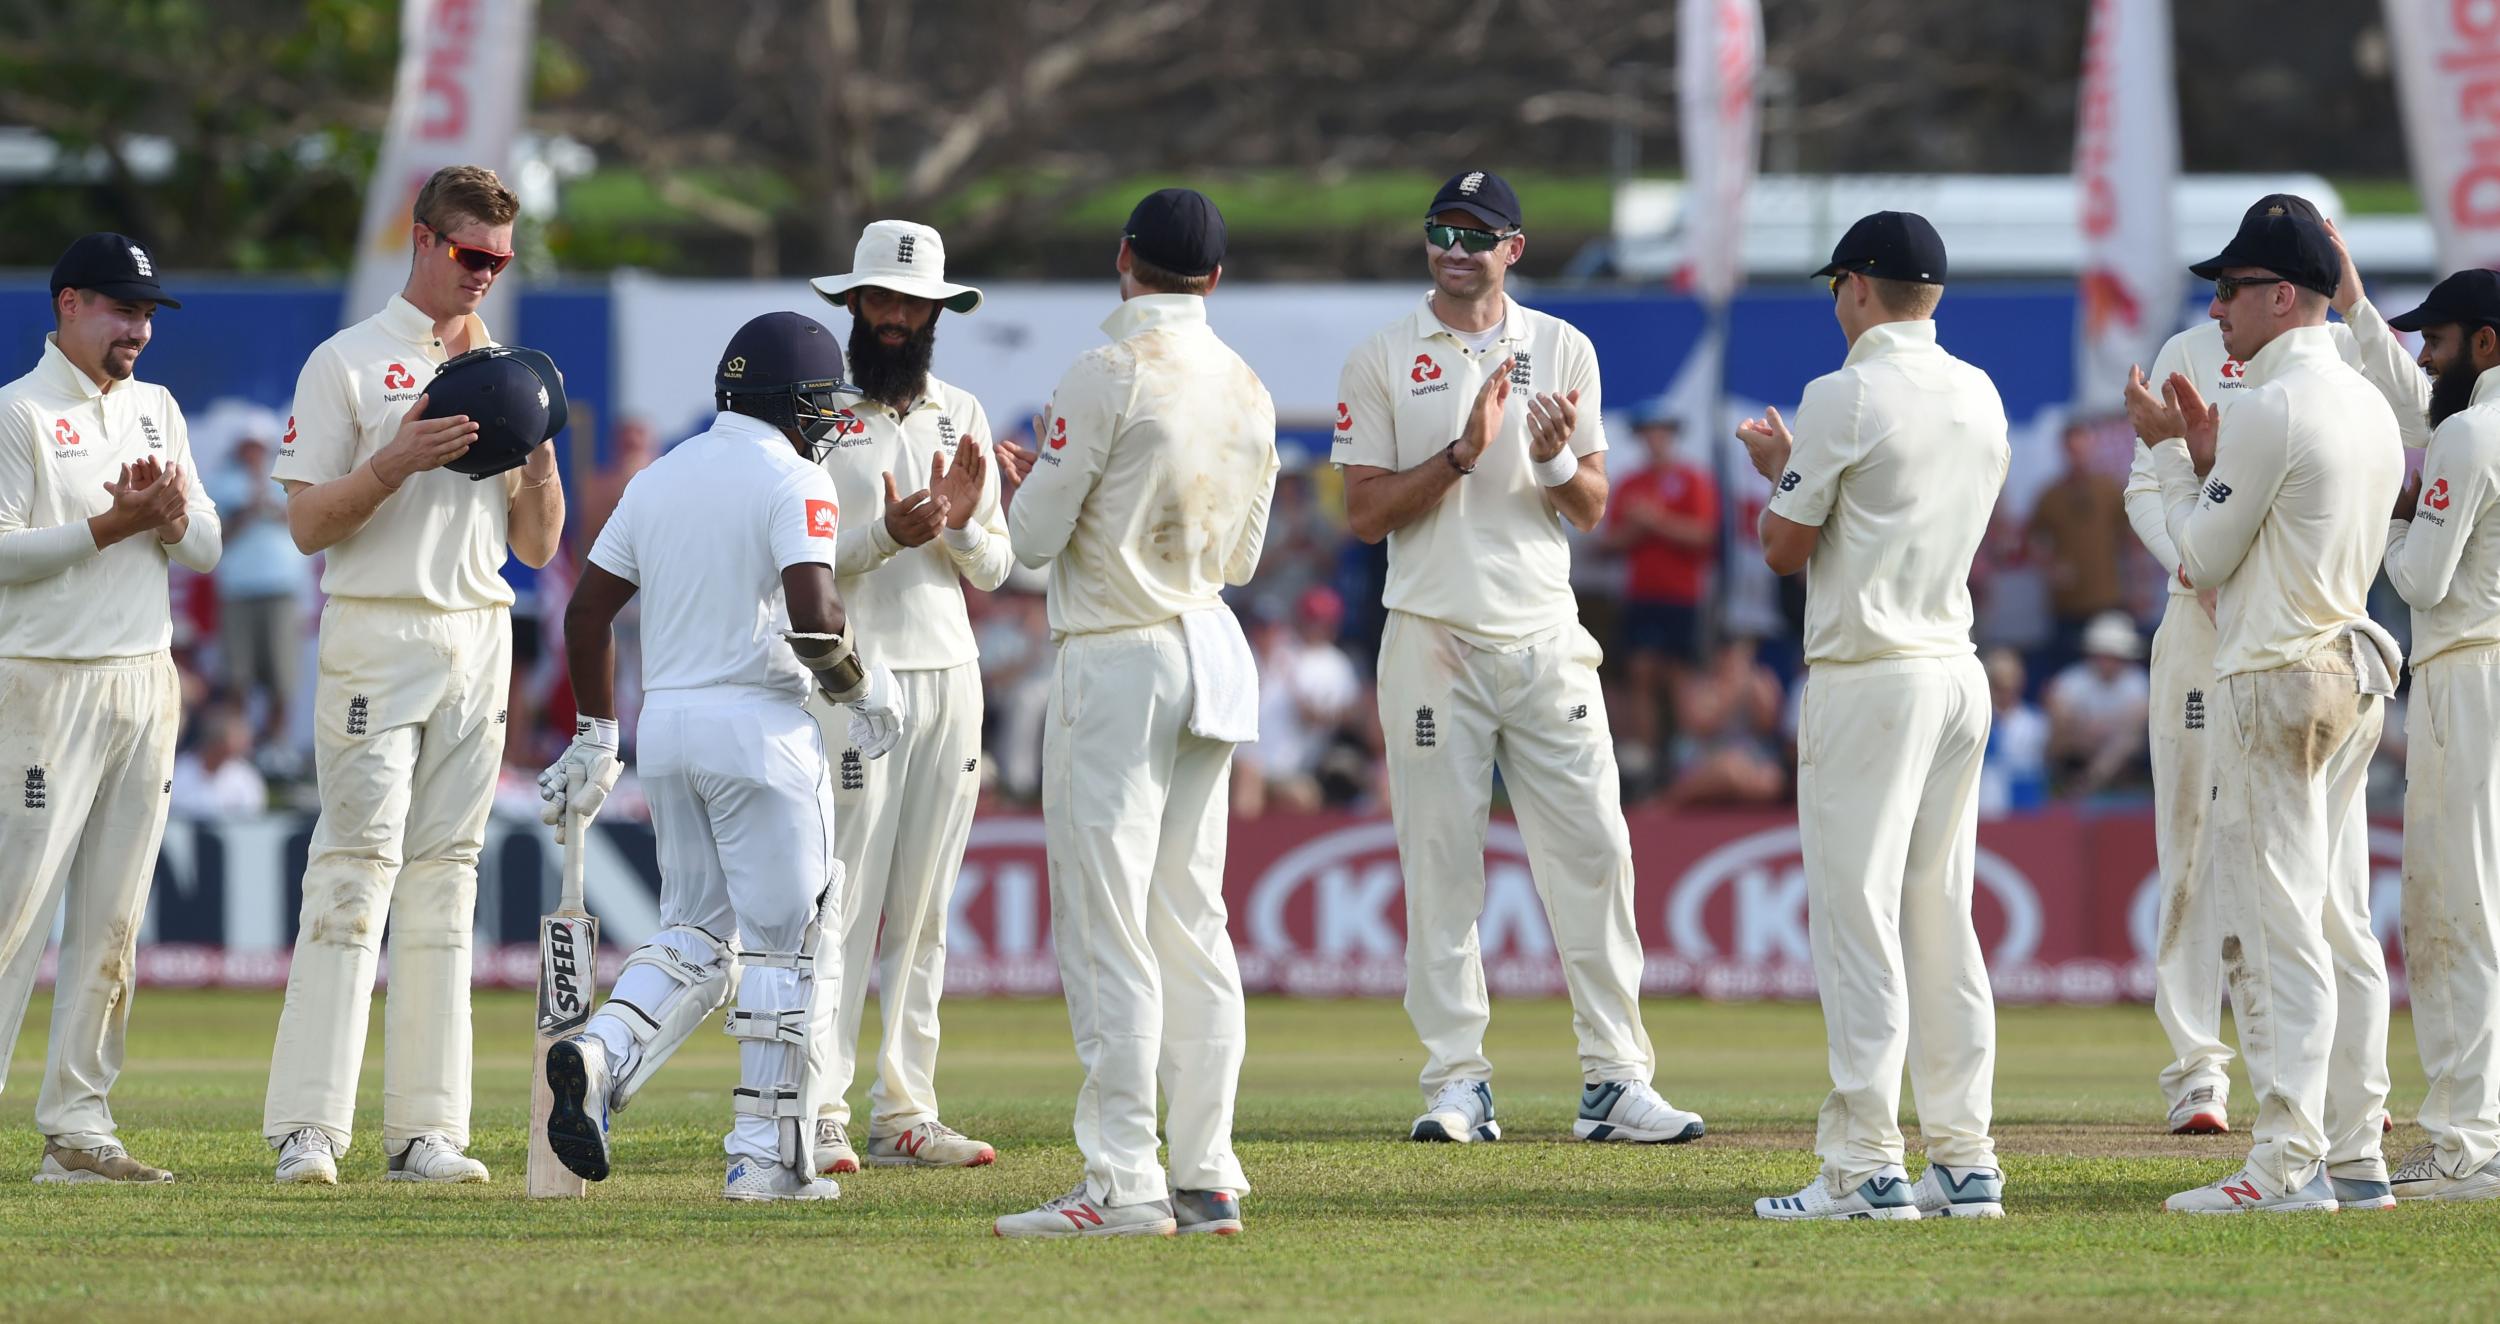 Rangana Herath was given a guard of honour as he went out to bat